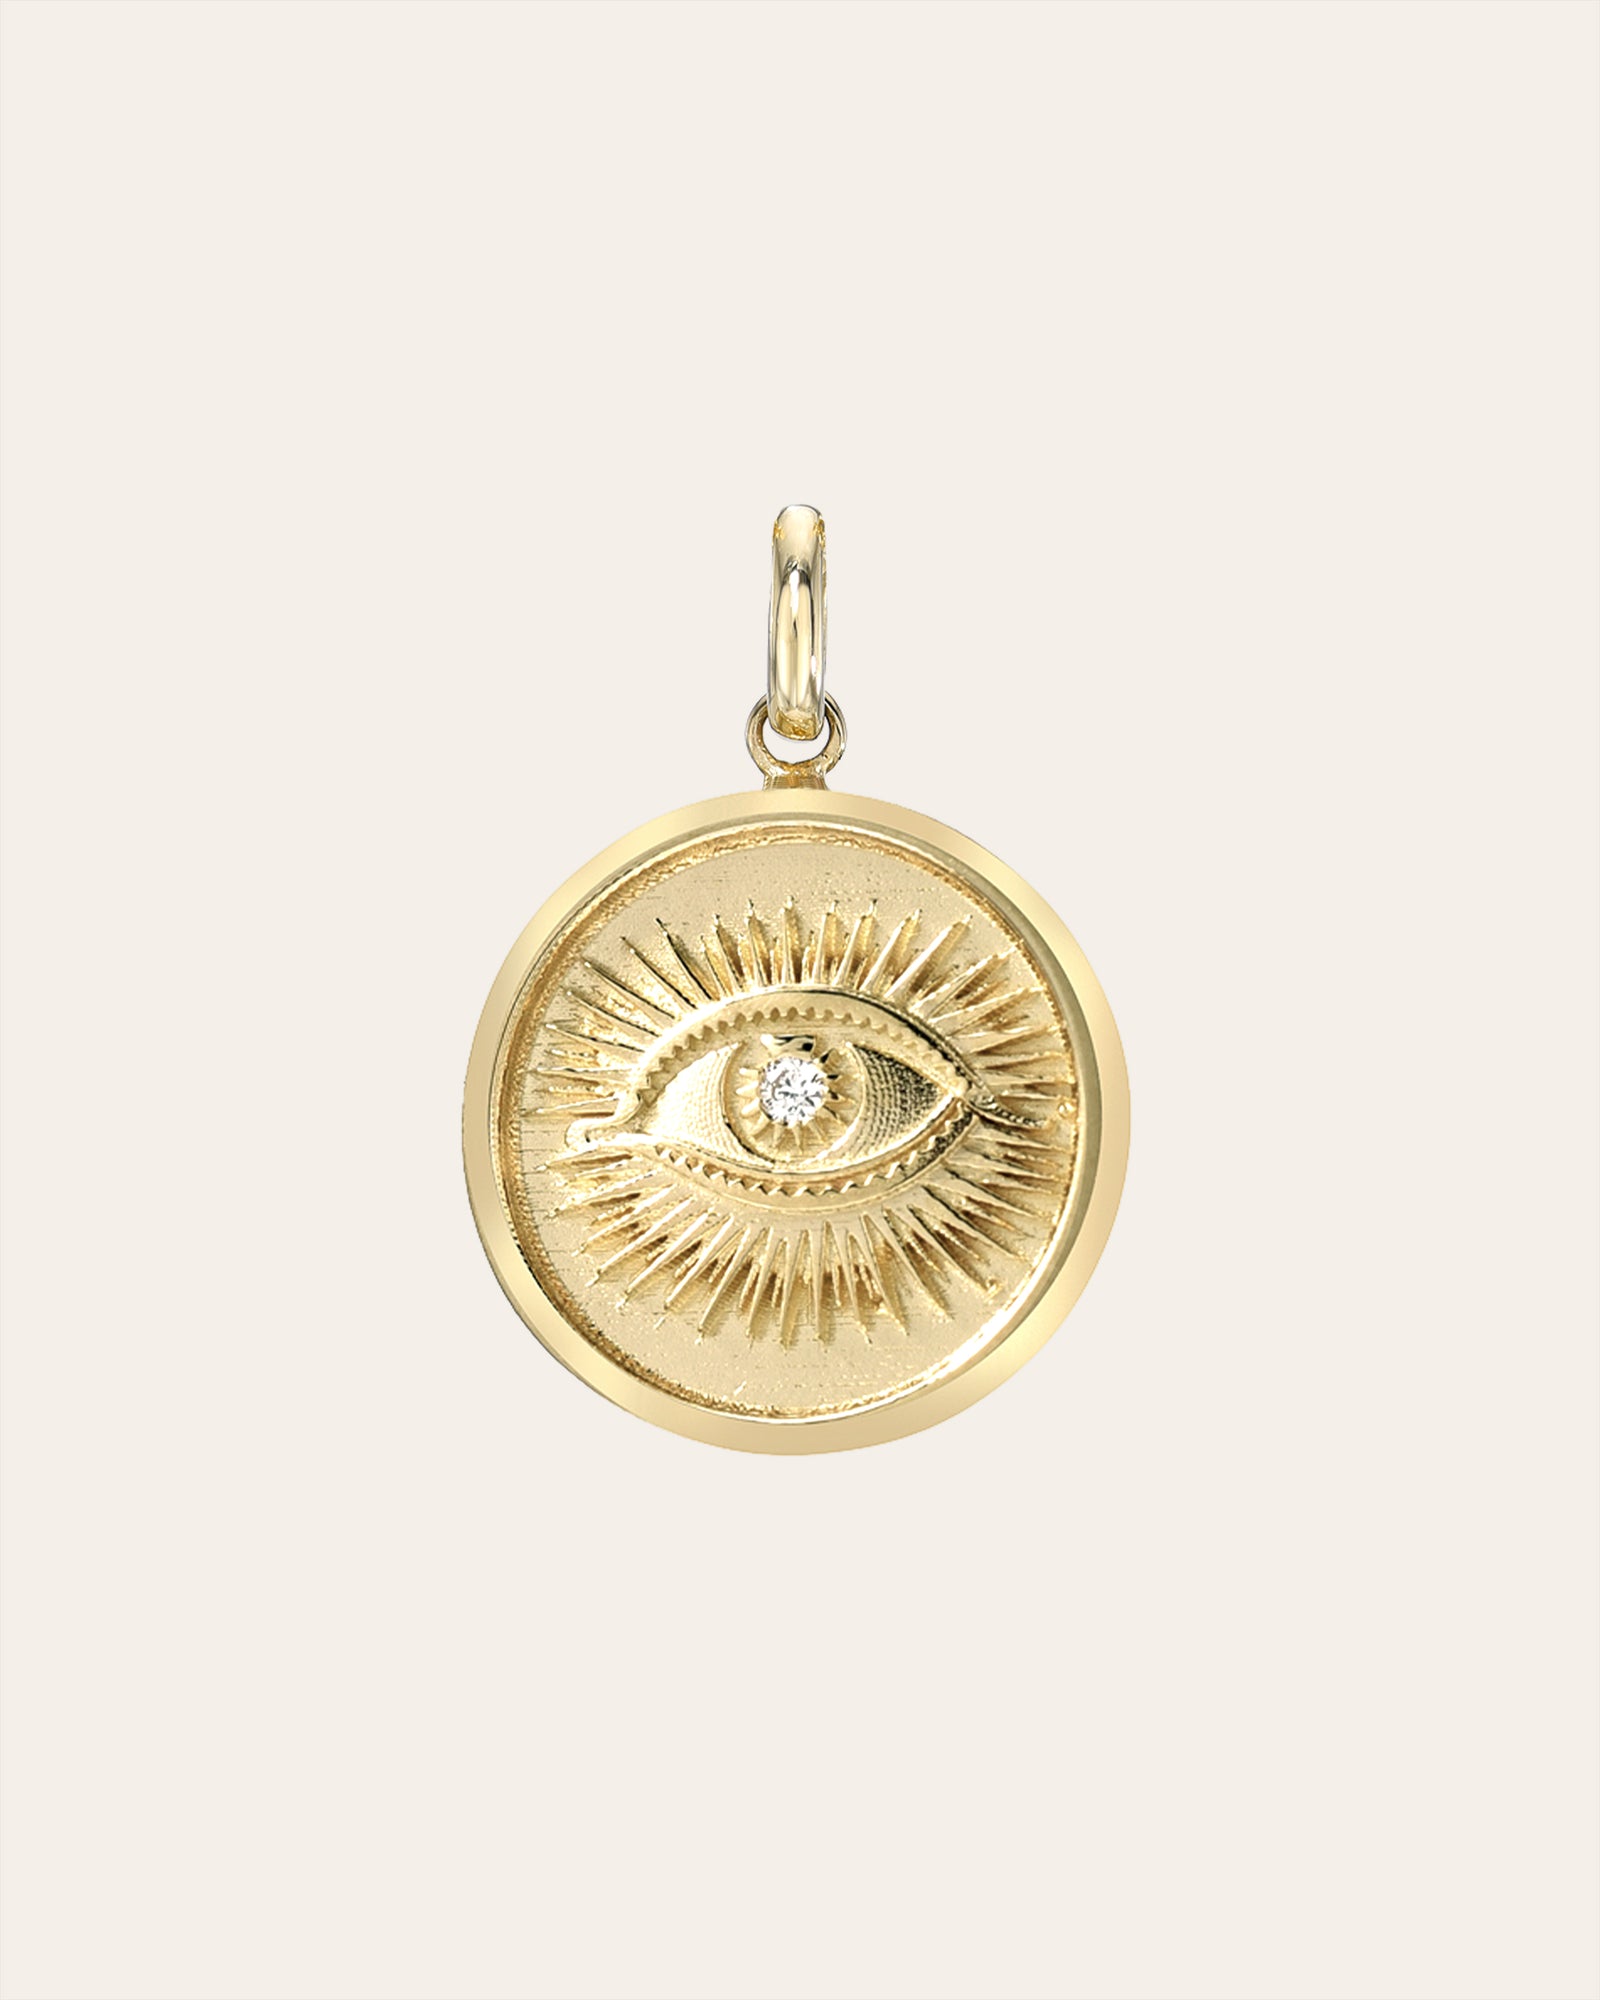 5 Queen Bee Gold Charm Pendants, Round Coin Charms, Gold Plated Metal, Double Sided Design, 20mm, chg0449